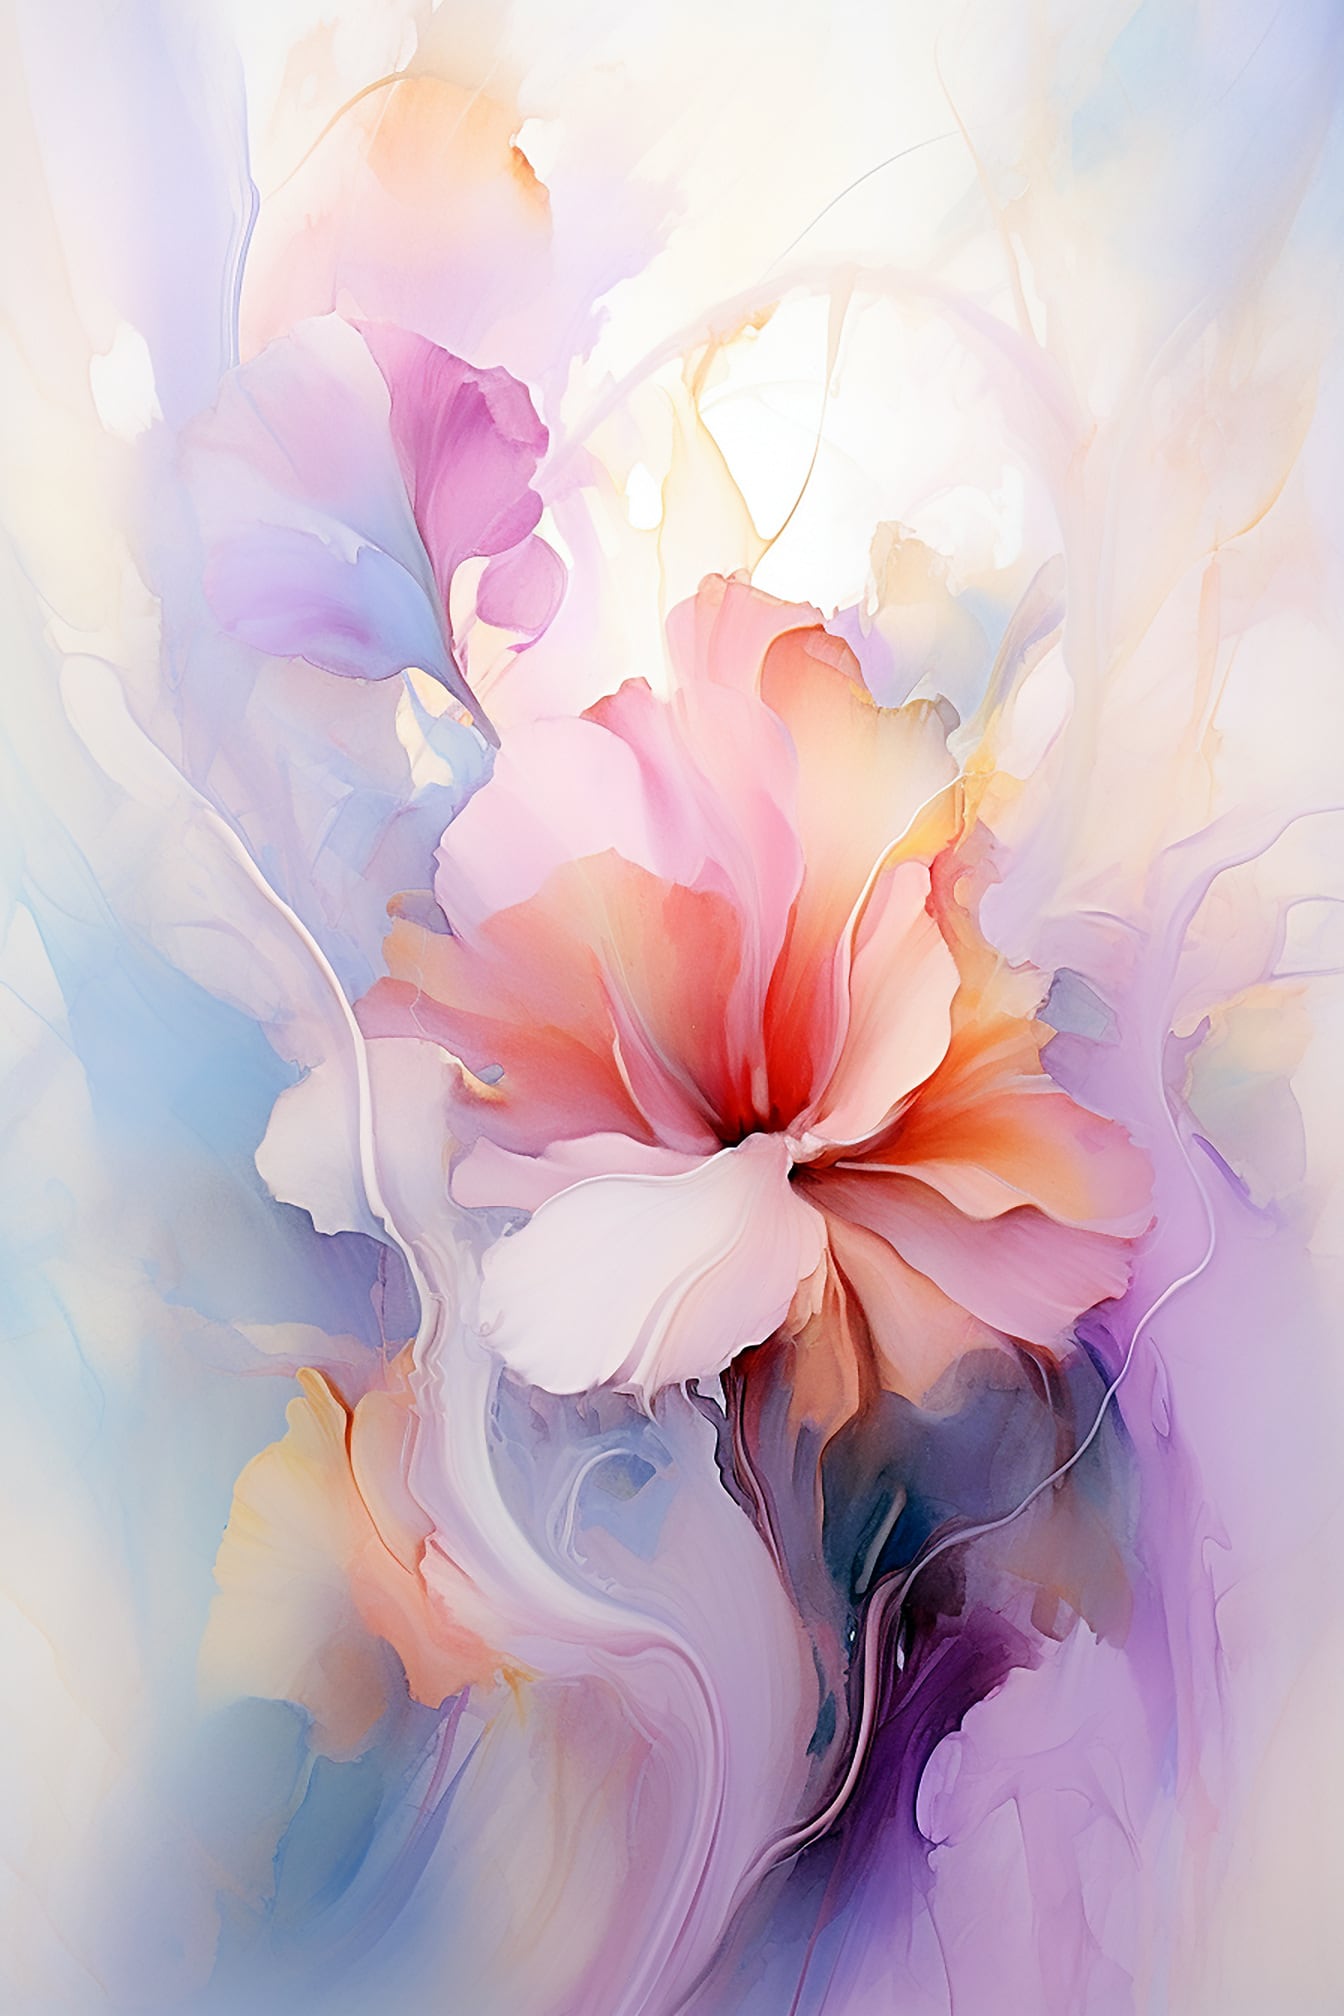 Abstract watercolor graphic of flowers with pastel colors